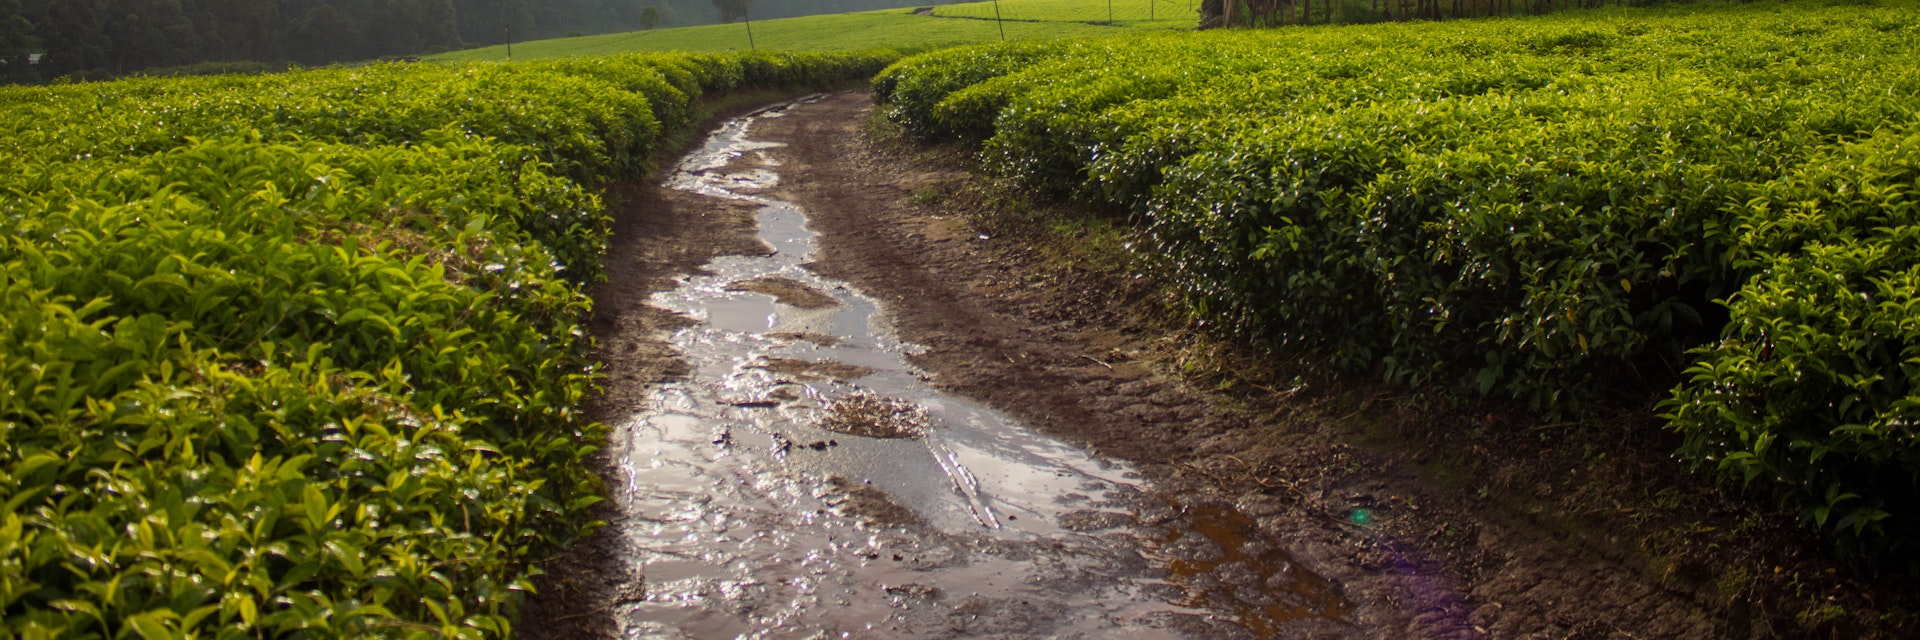 A road through tea fields after a rain storm in the West region of Cameroon.